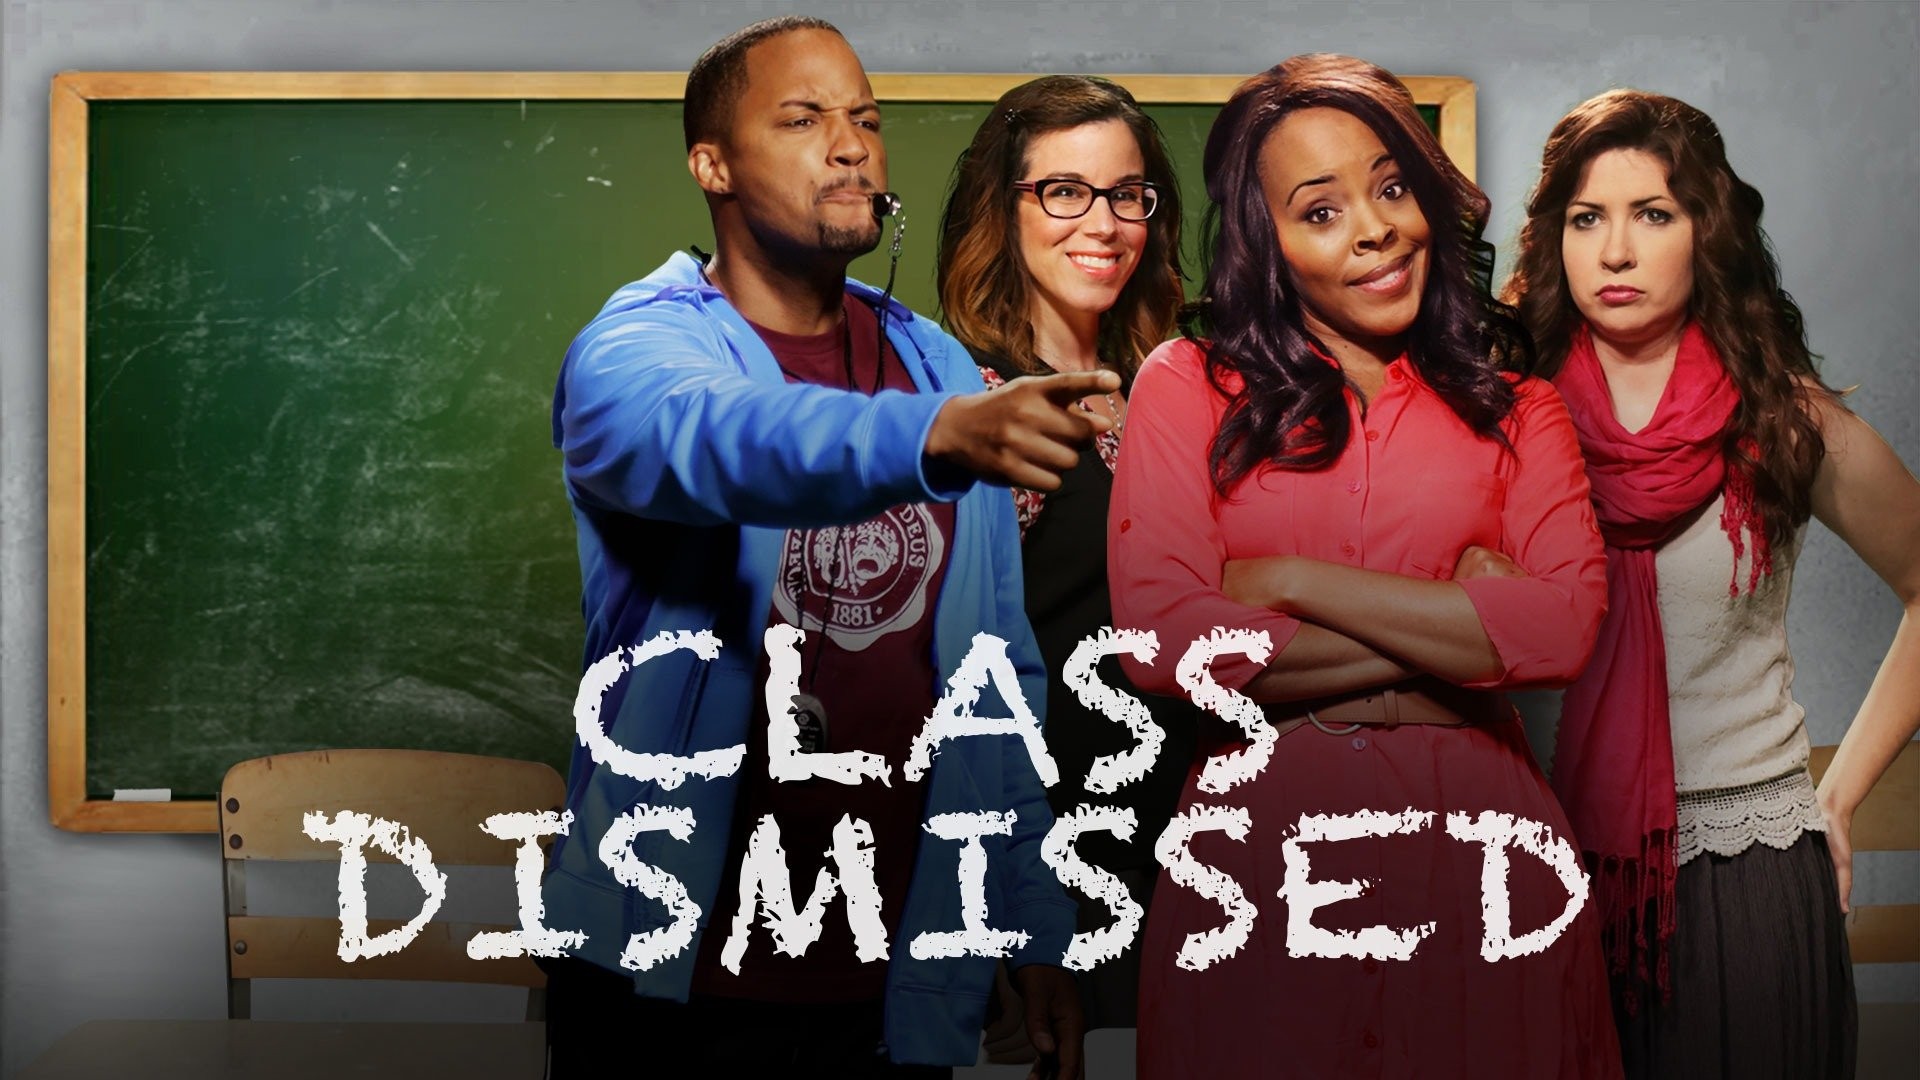 Class Dismissed: How TV Frames the Working Class (Video 2005) - IMDb